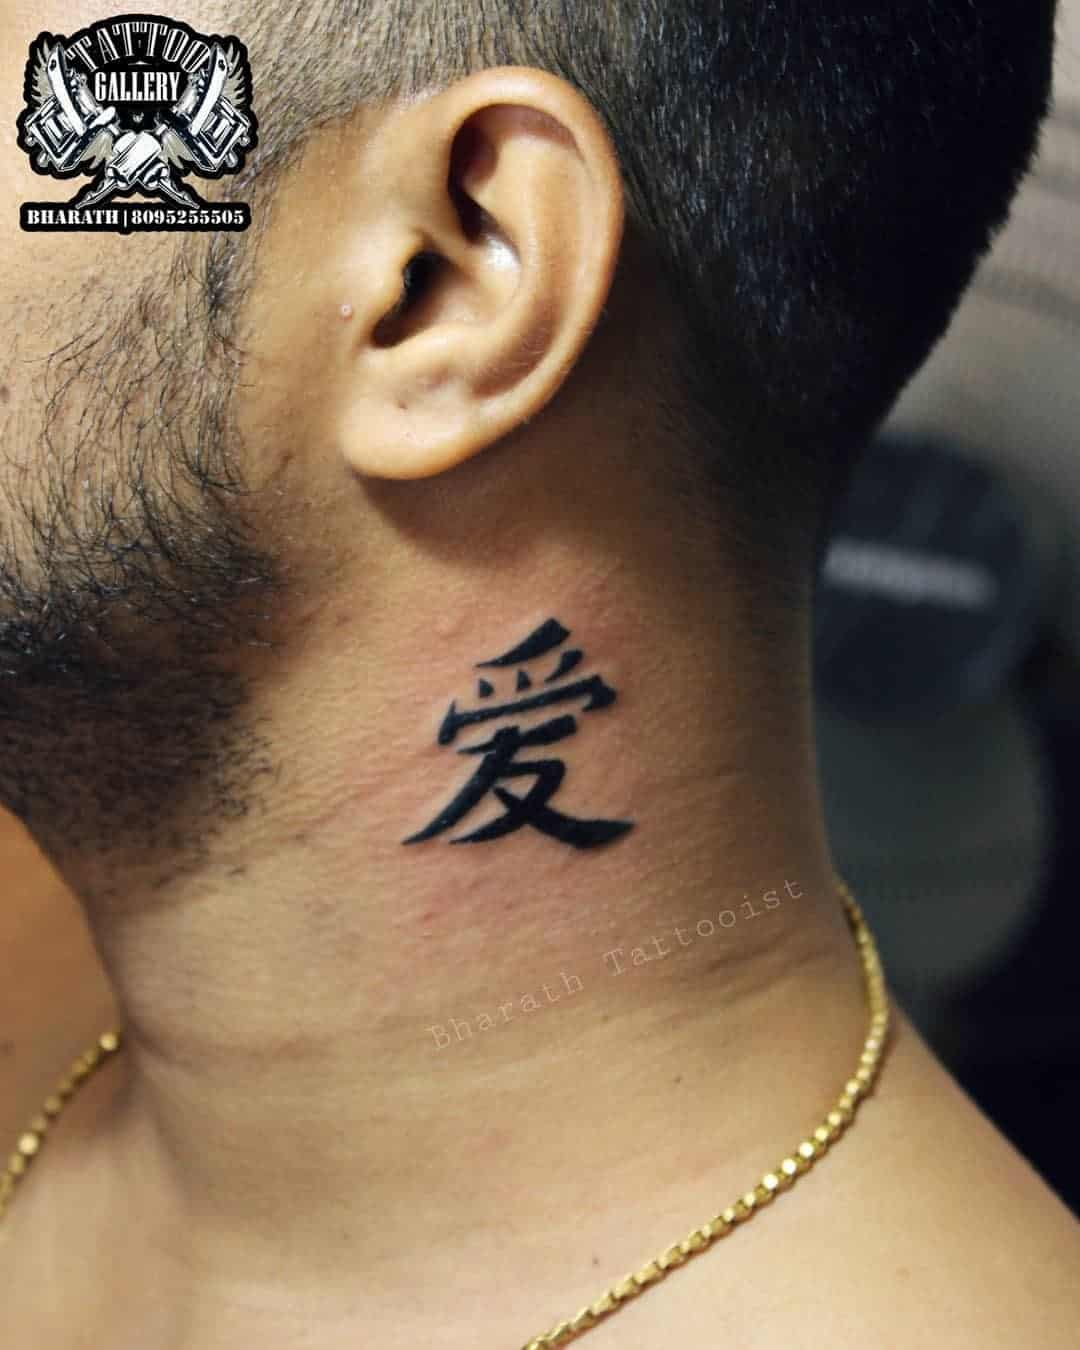 15 Awesome Chinese Tattoo Designs With Meanings  Tattoo designs and  meanings Writing tattoos Chinese tattoo